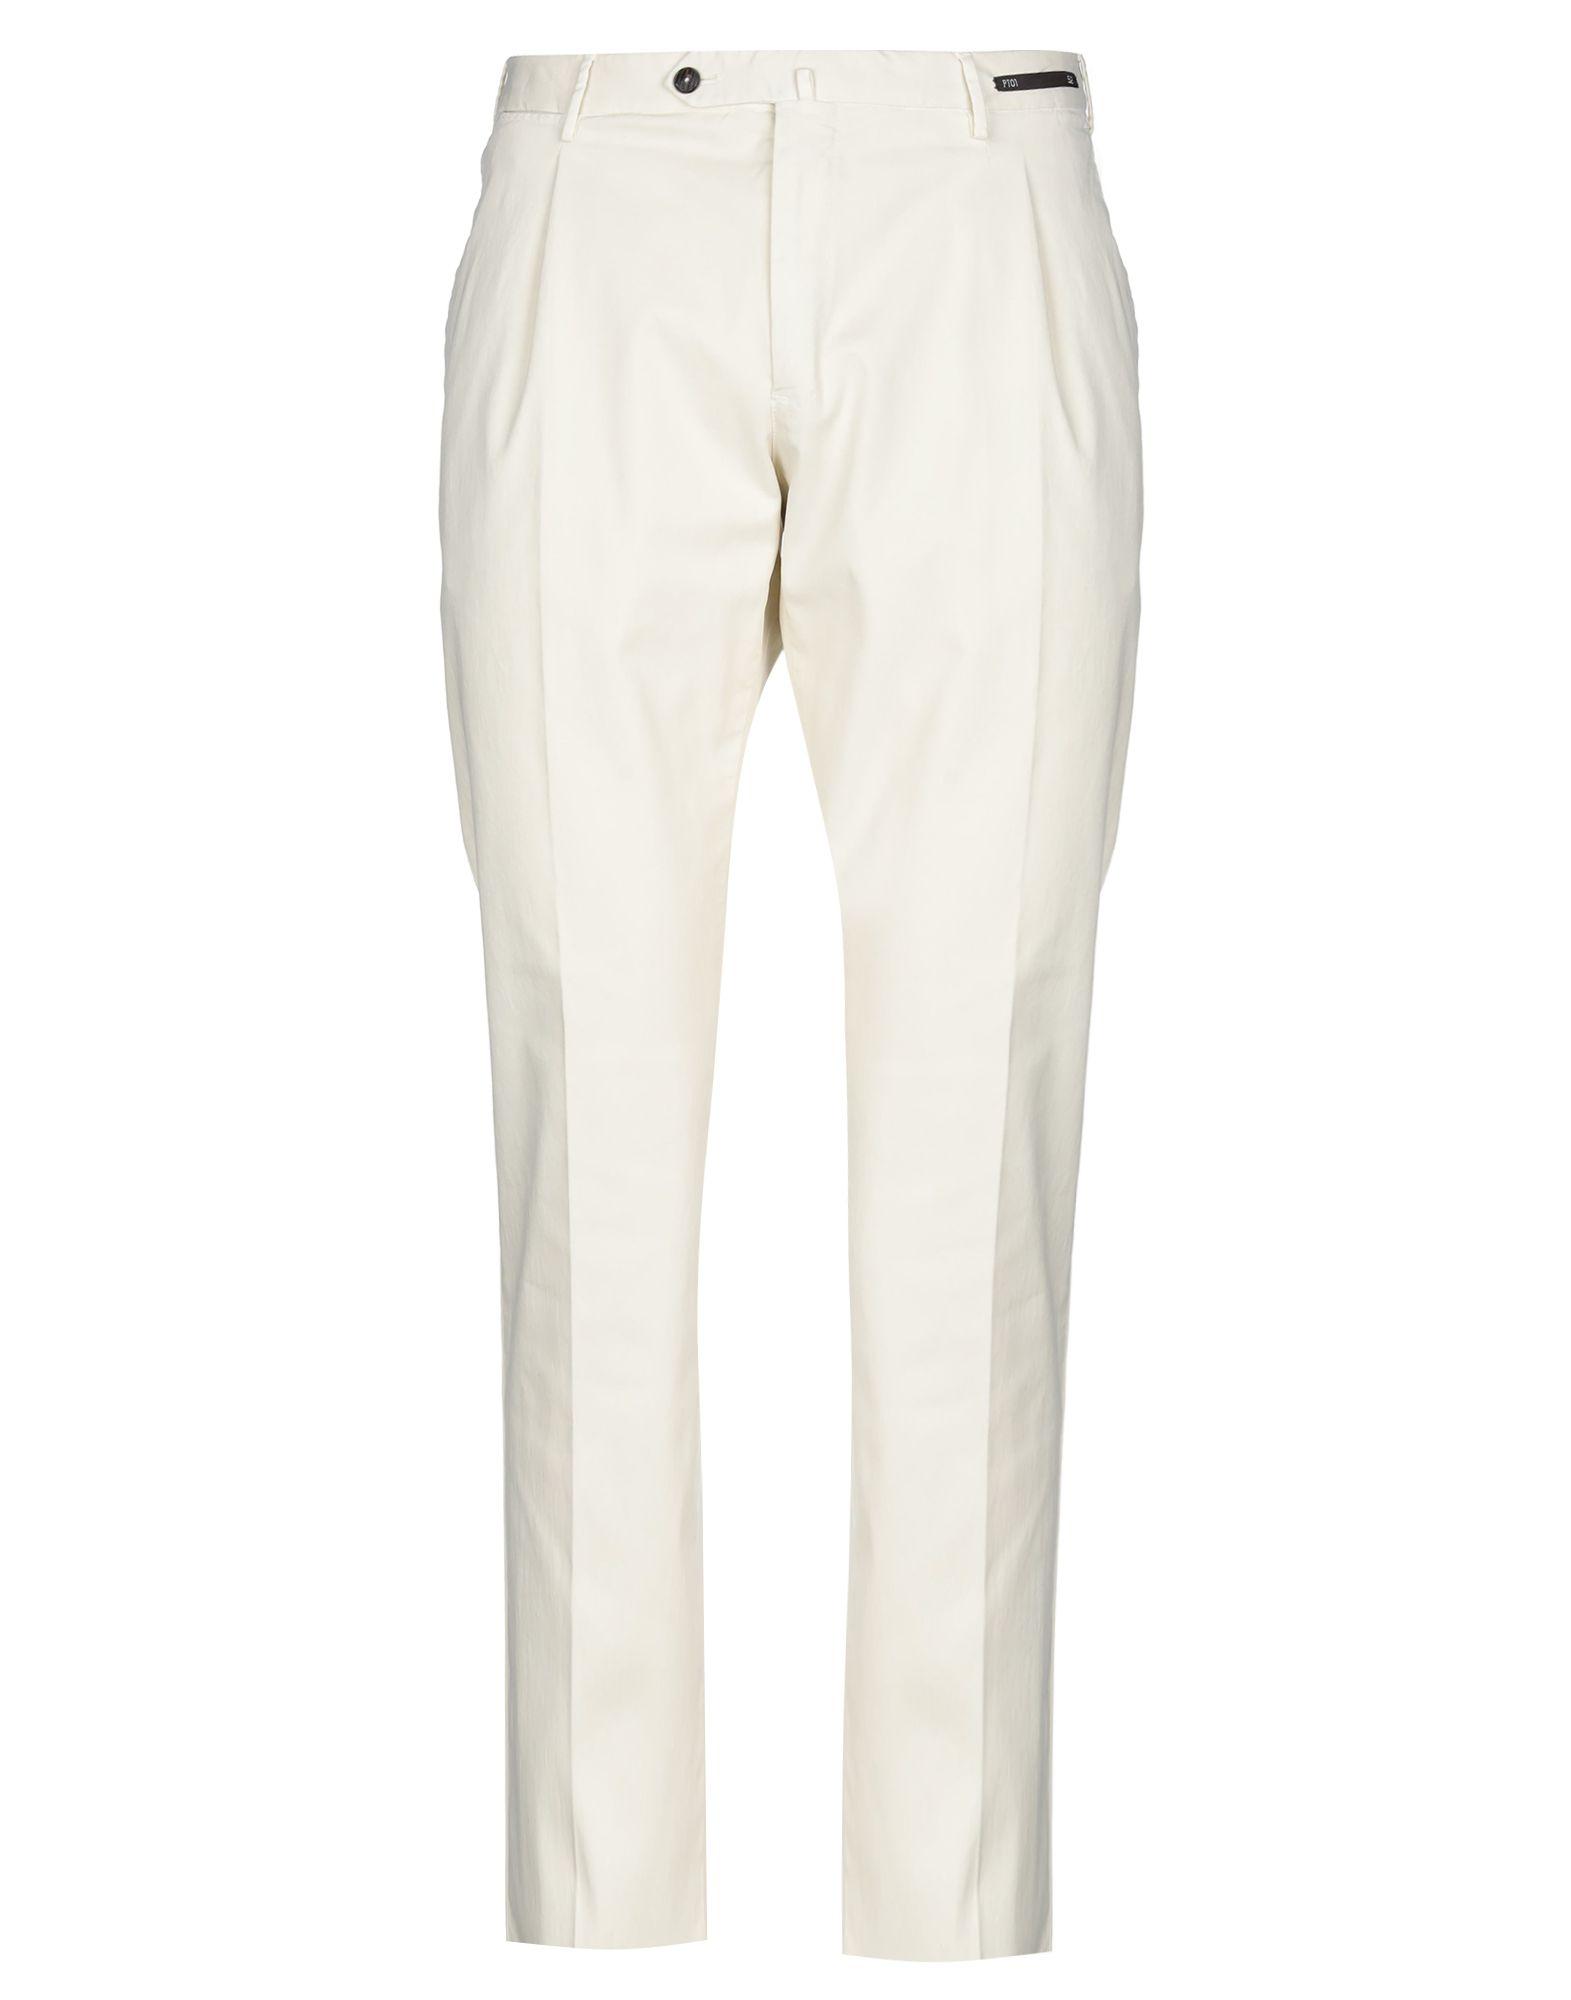 PT01 Cotton Casual Pants in Ivory (White) for Men - Lyst